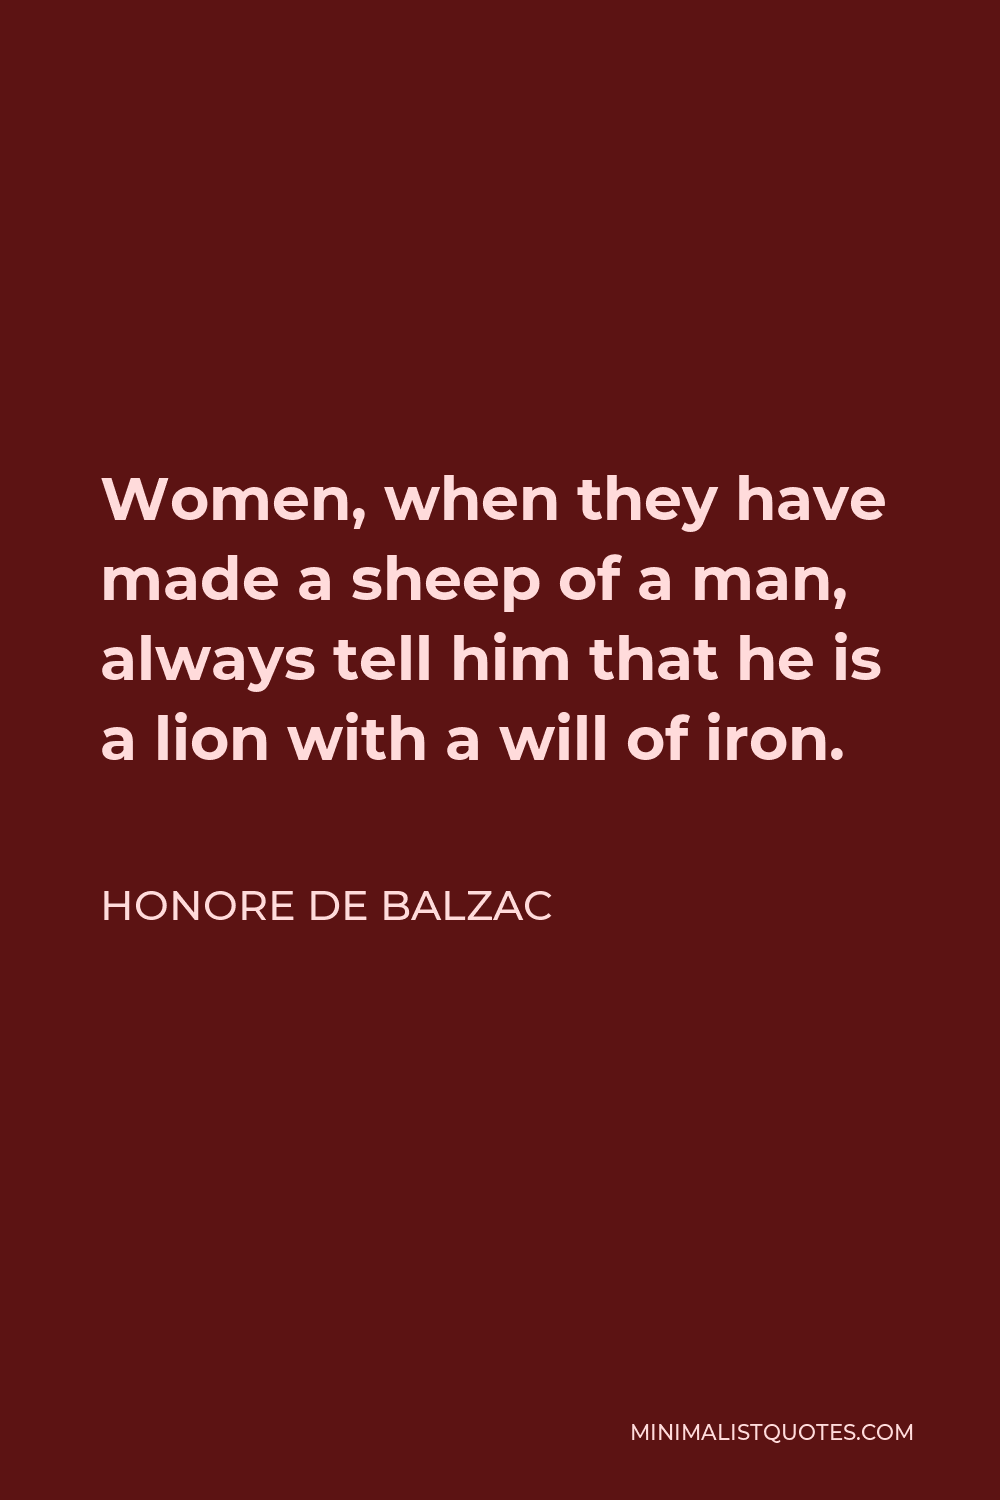 Honore de Balzac Quote - Women, when they have made a sheep of a man, always tell him that he is a lion with a will of iron.